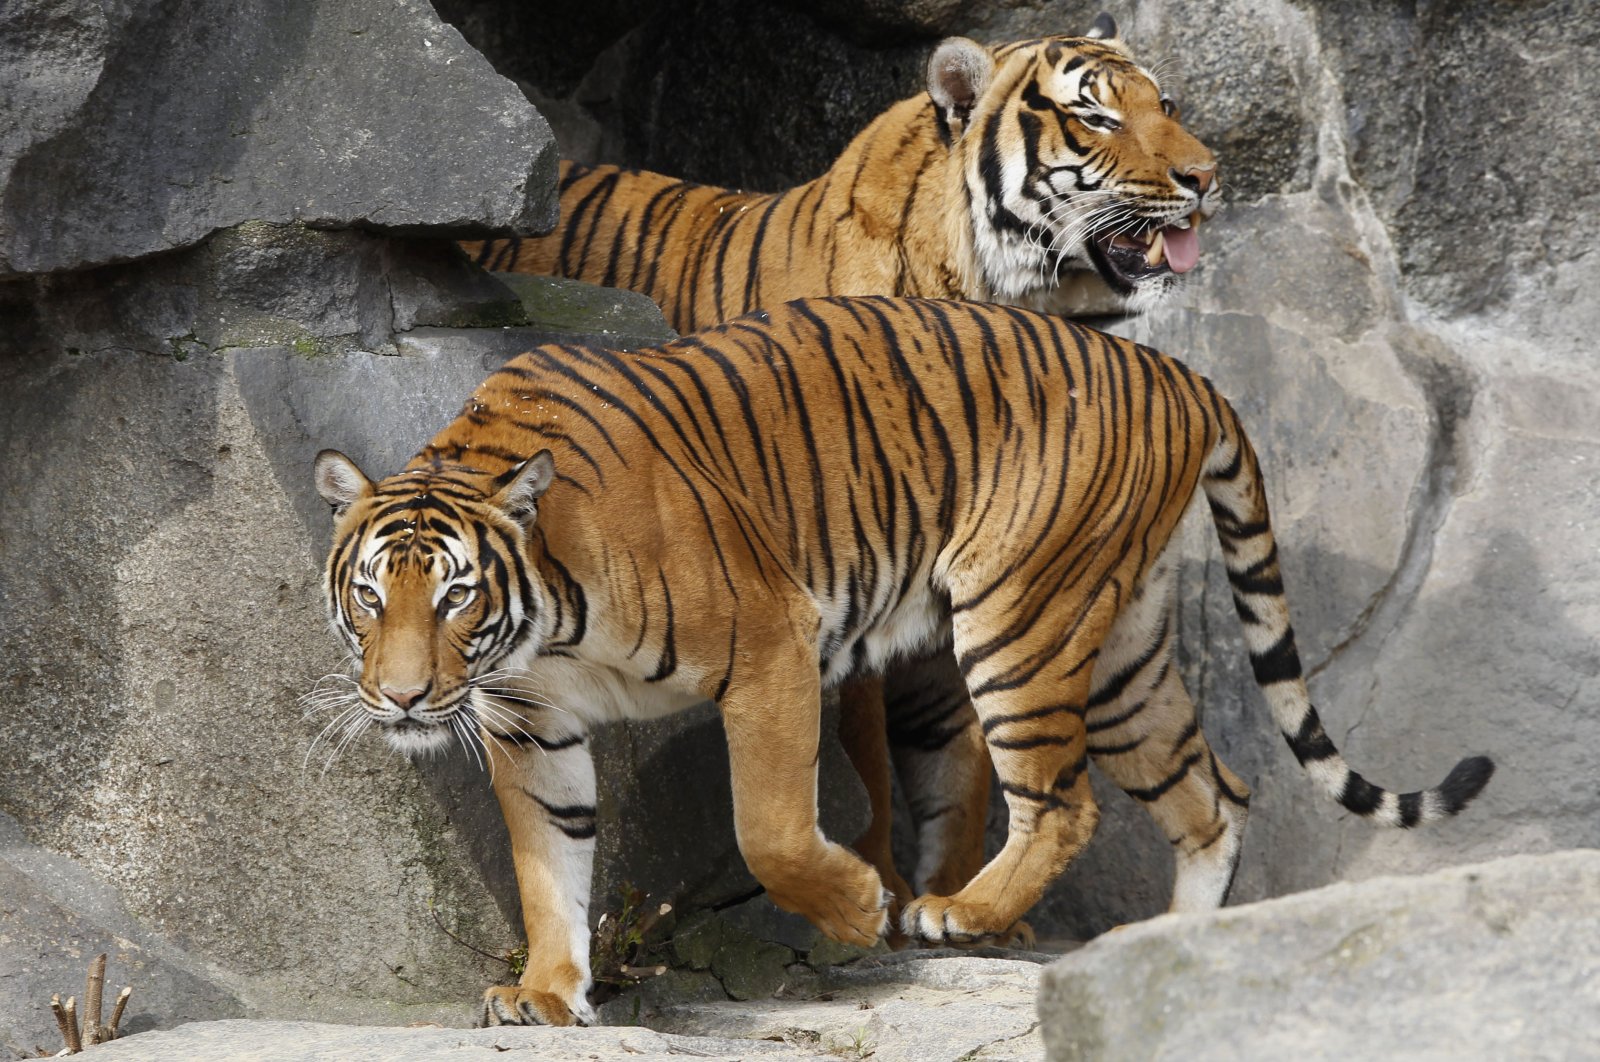 Adult Indochinese tigers are presented to the media for the first time at their outdoor cage at Tierpark Friedrichsfelde Zoo in Berlin, Germany, April 3, 2012. (Reuters Photo)